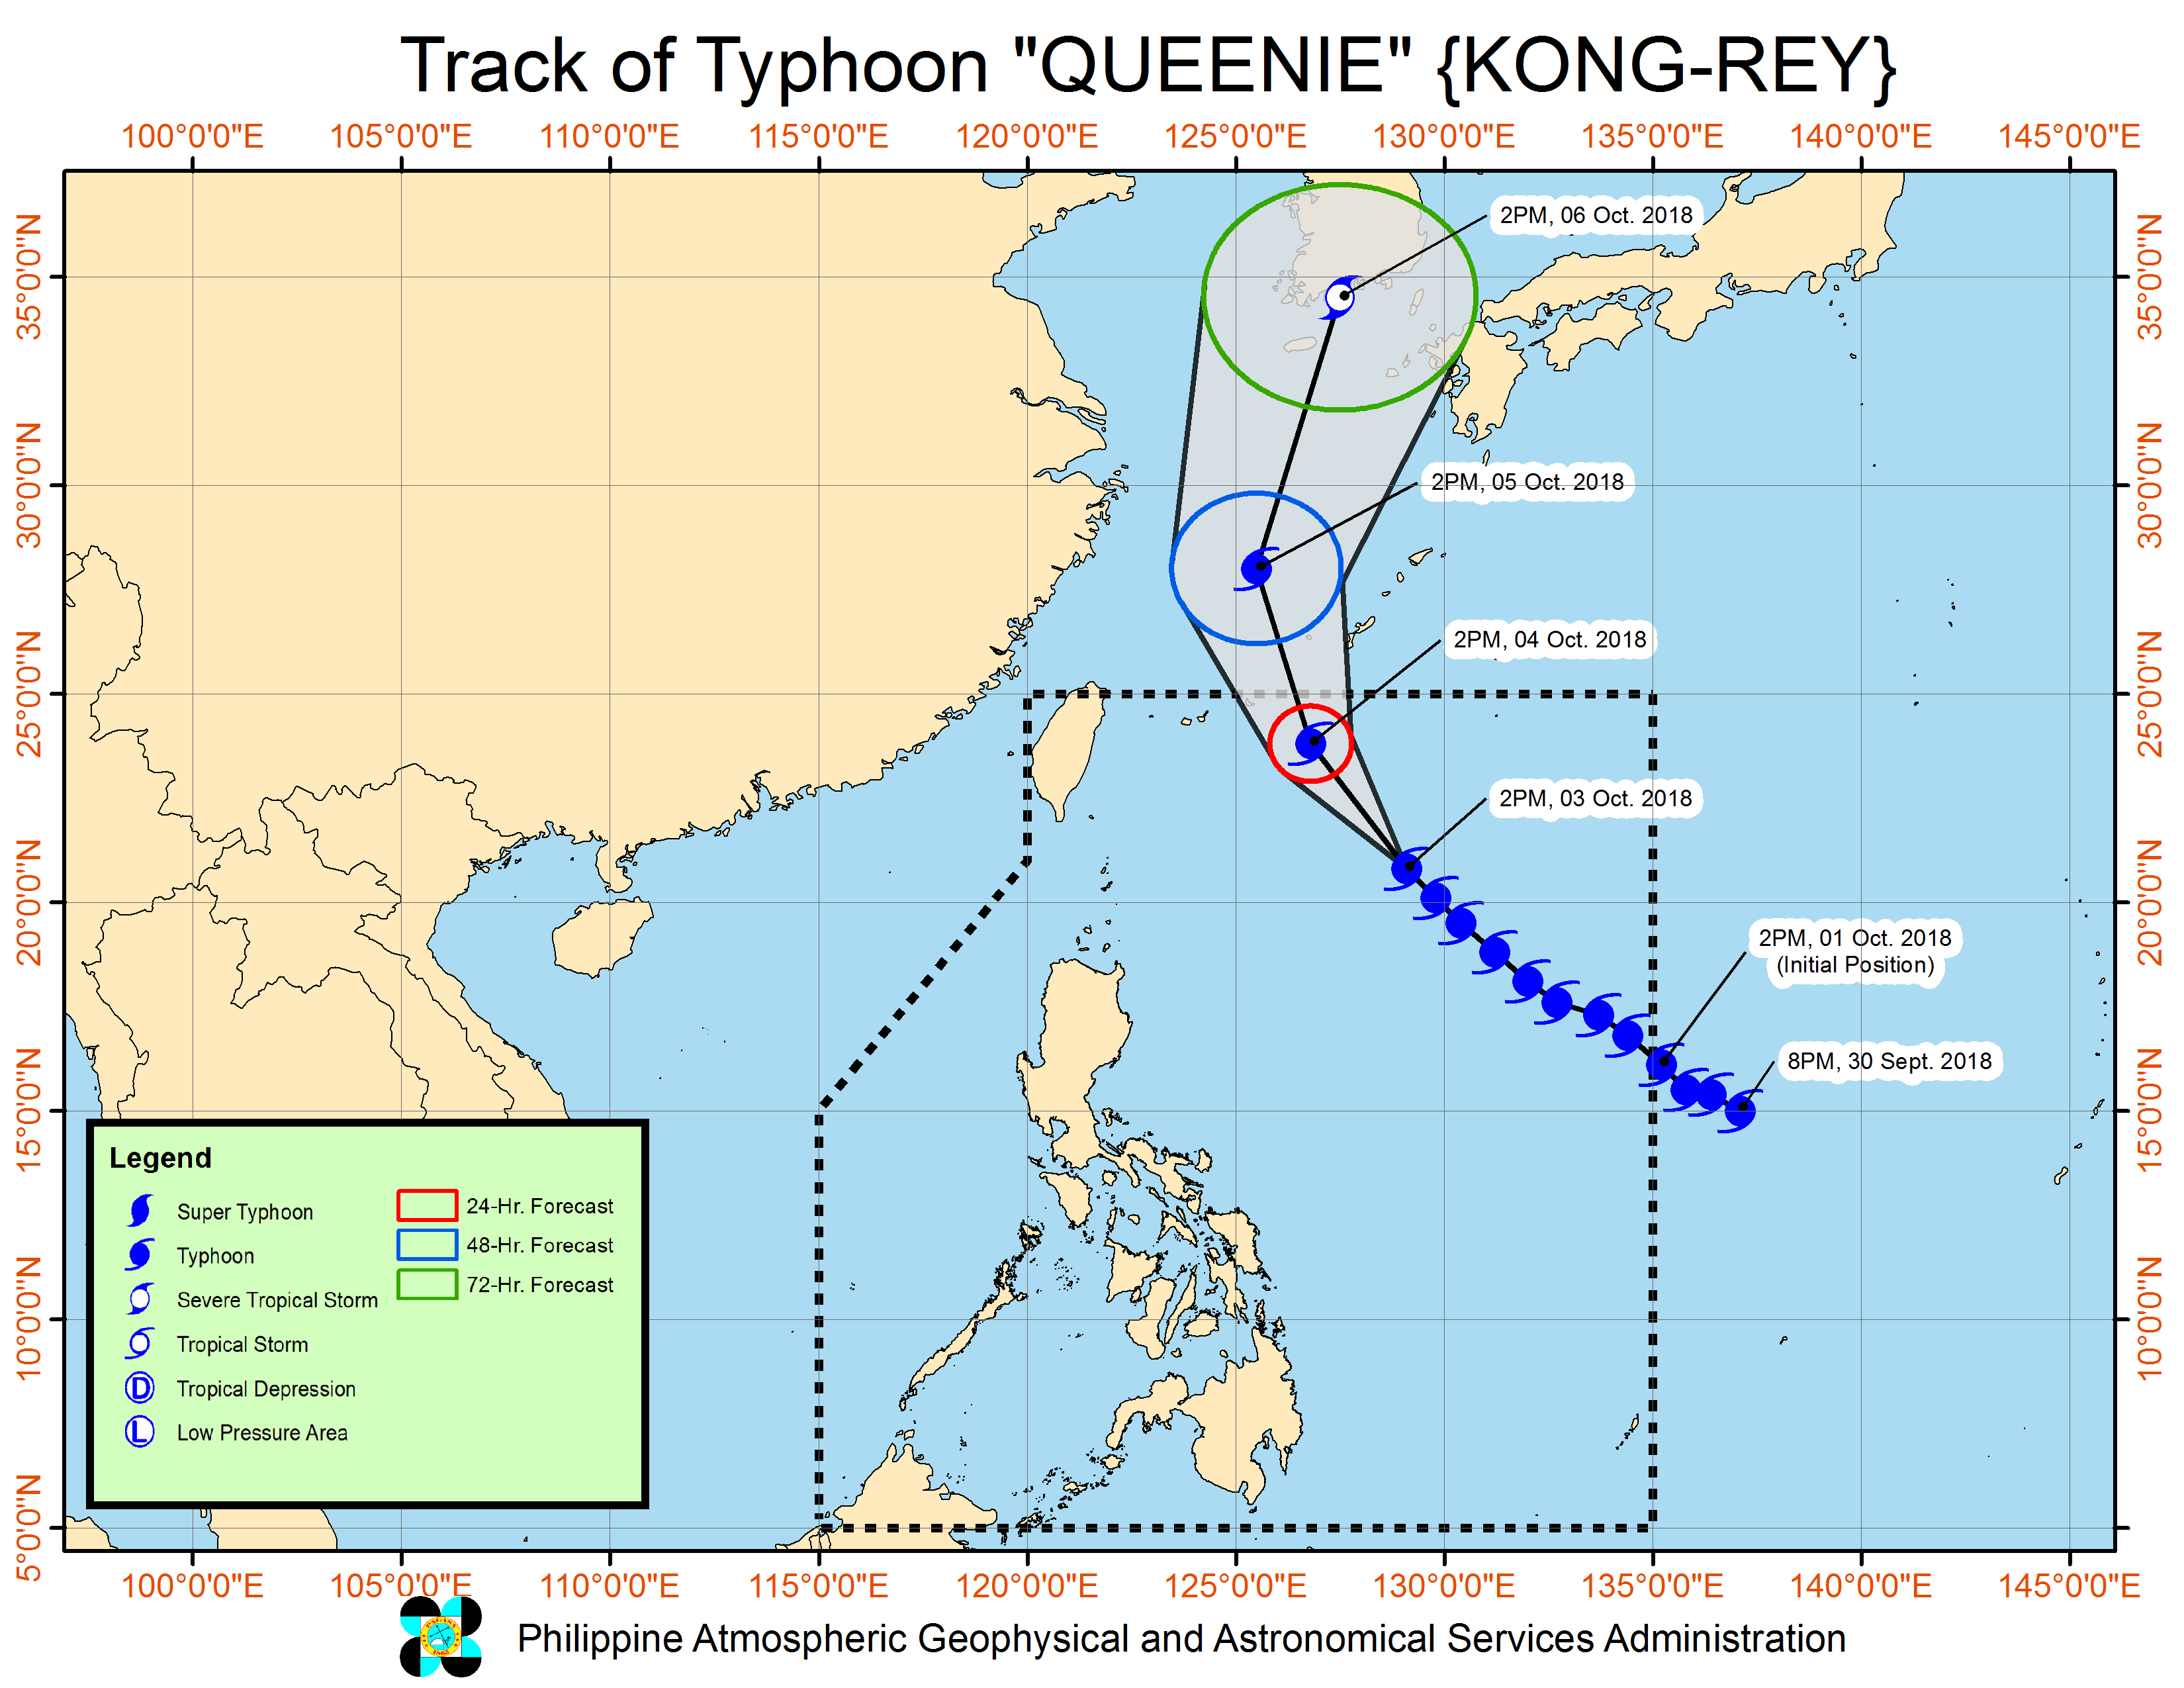 Forecast track of Typhoon Queenie (Kong-rey) as of October 3, 2018, 5 pm. Image from PAGASA  